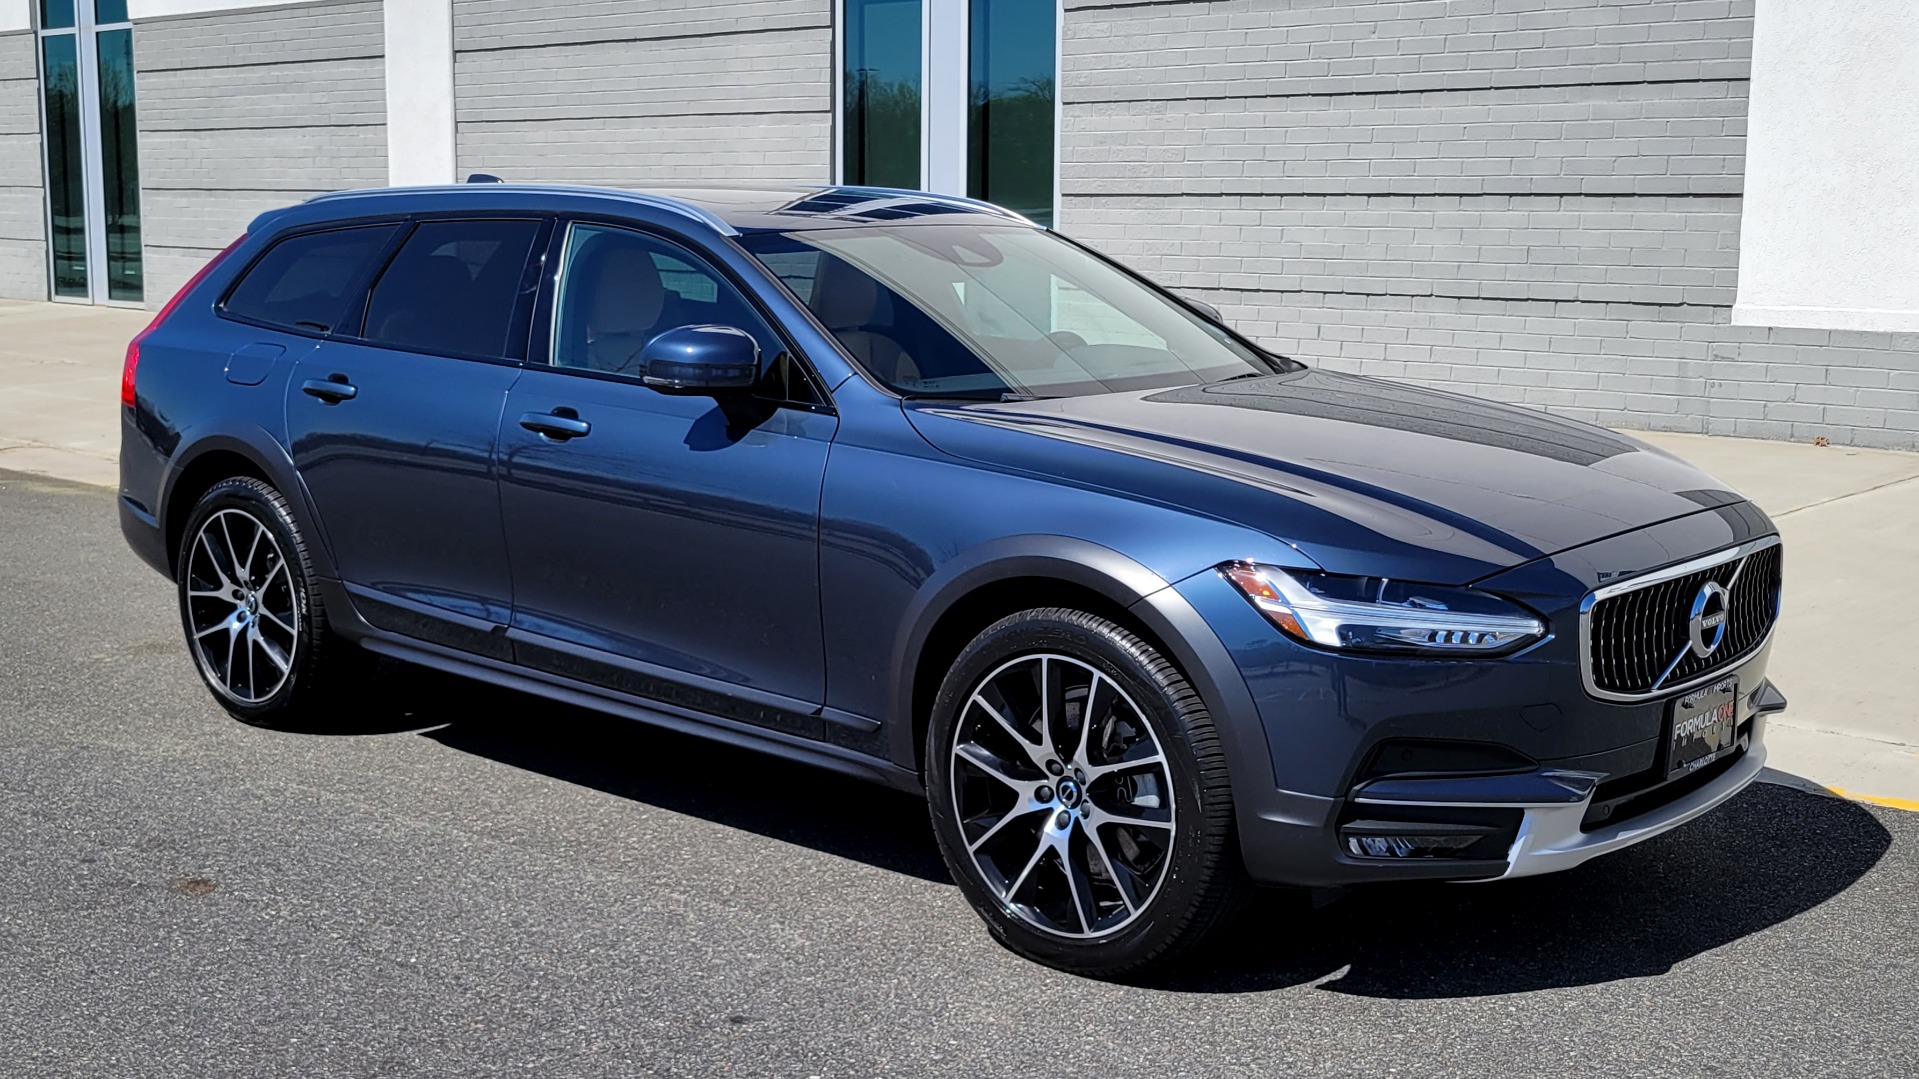 Used 2020 Volvo V90 CROSS COUNTRY T6 2.0L WAGON / AWD / HTD STS / PROTECTION PKG / REARVIEW for sale $51,000 at Formula Imports in Charlotte NC 28227 4